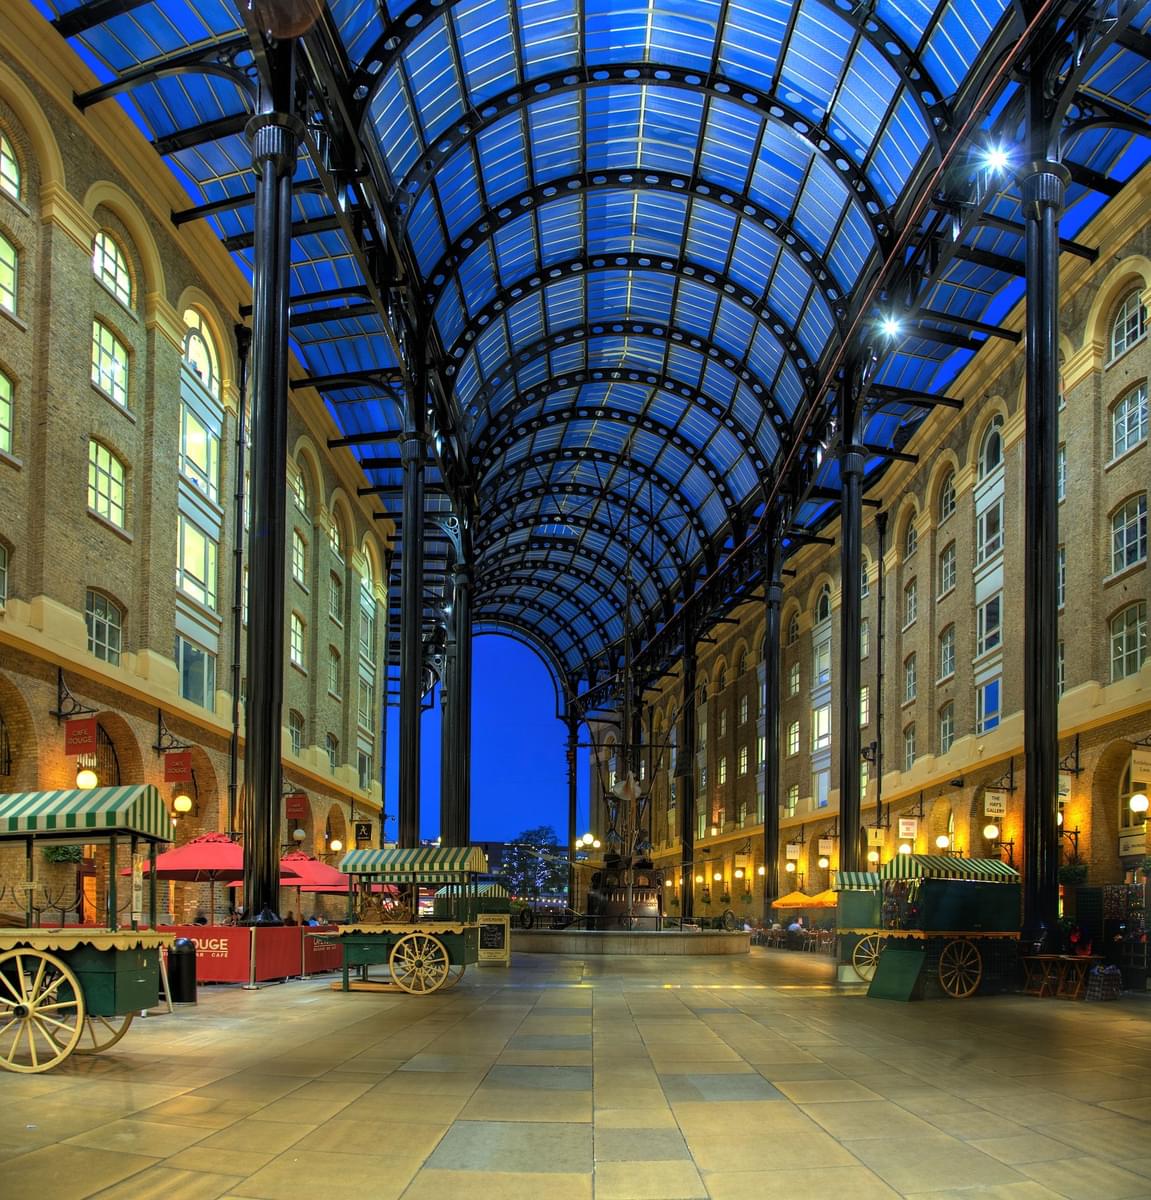 Stop By At Hay’s Galleria